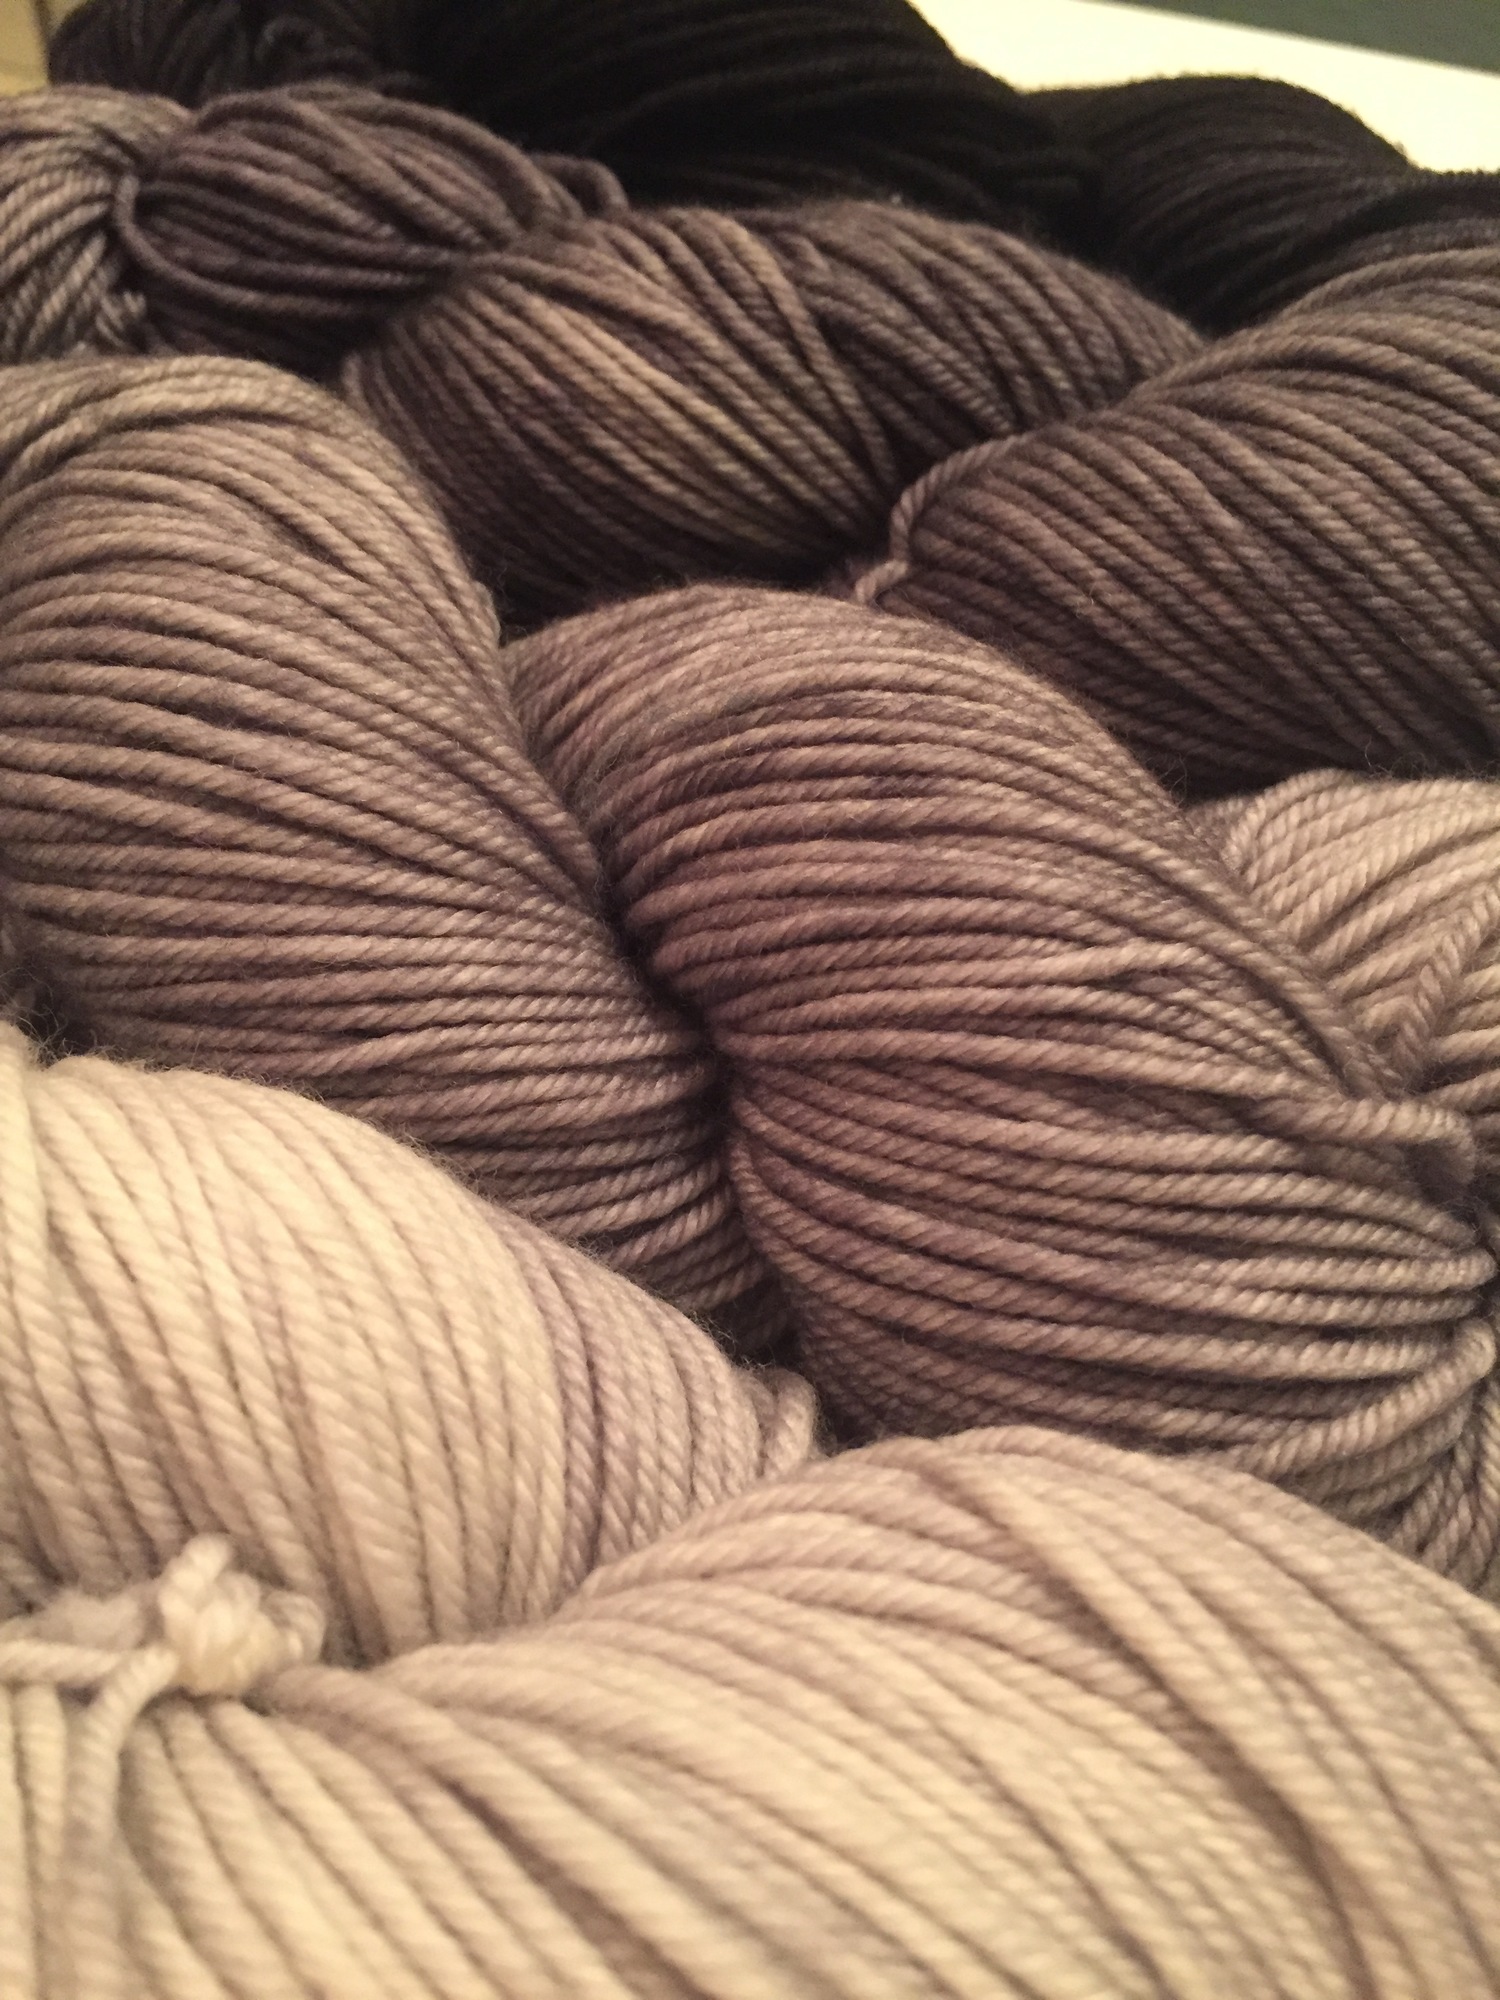 Knit Actually Podcast Episode 35 -- with guest Renee Magee from Knerd!